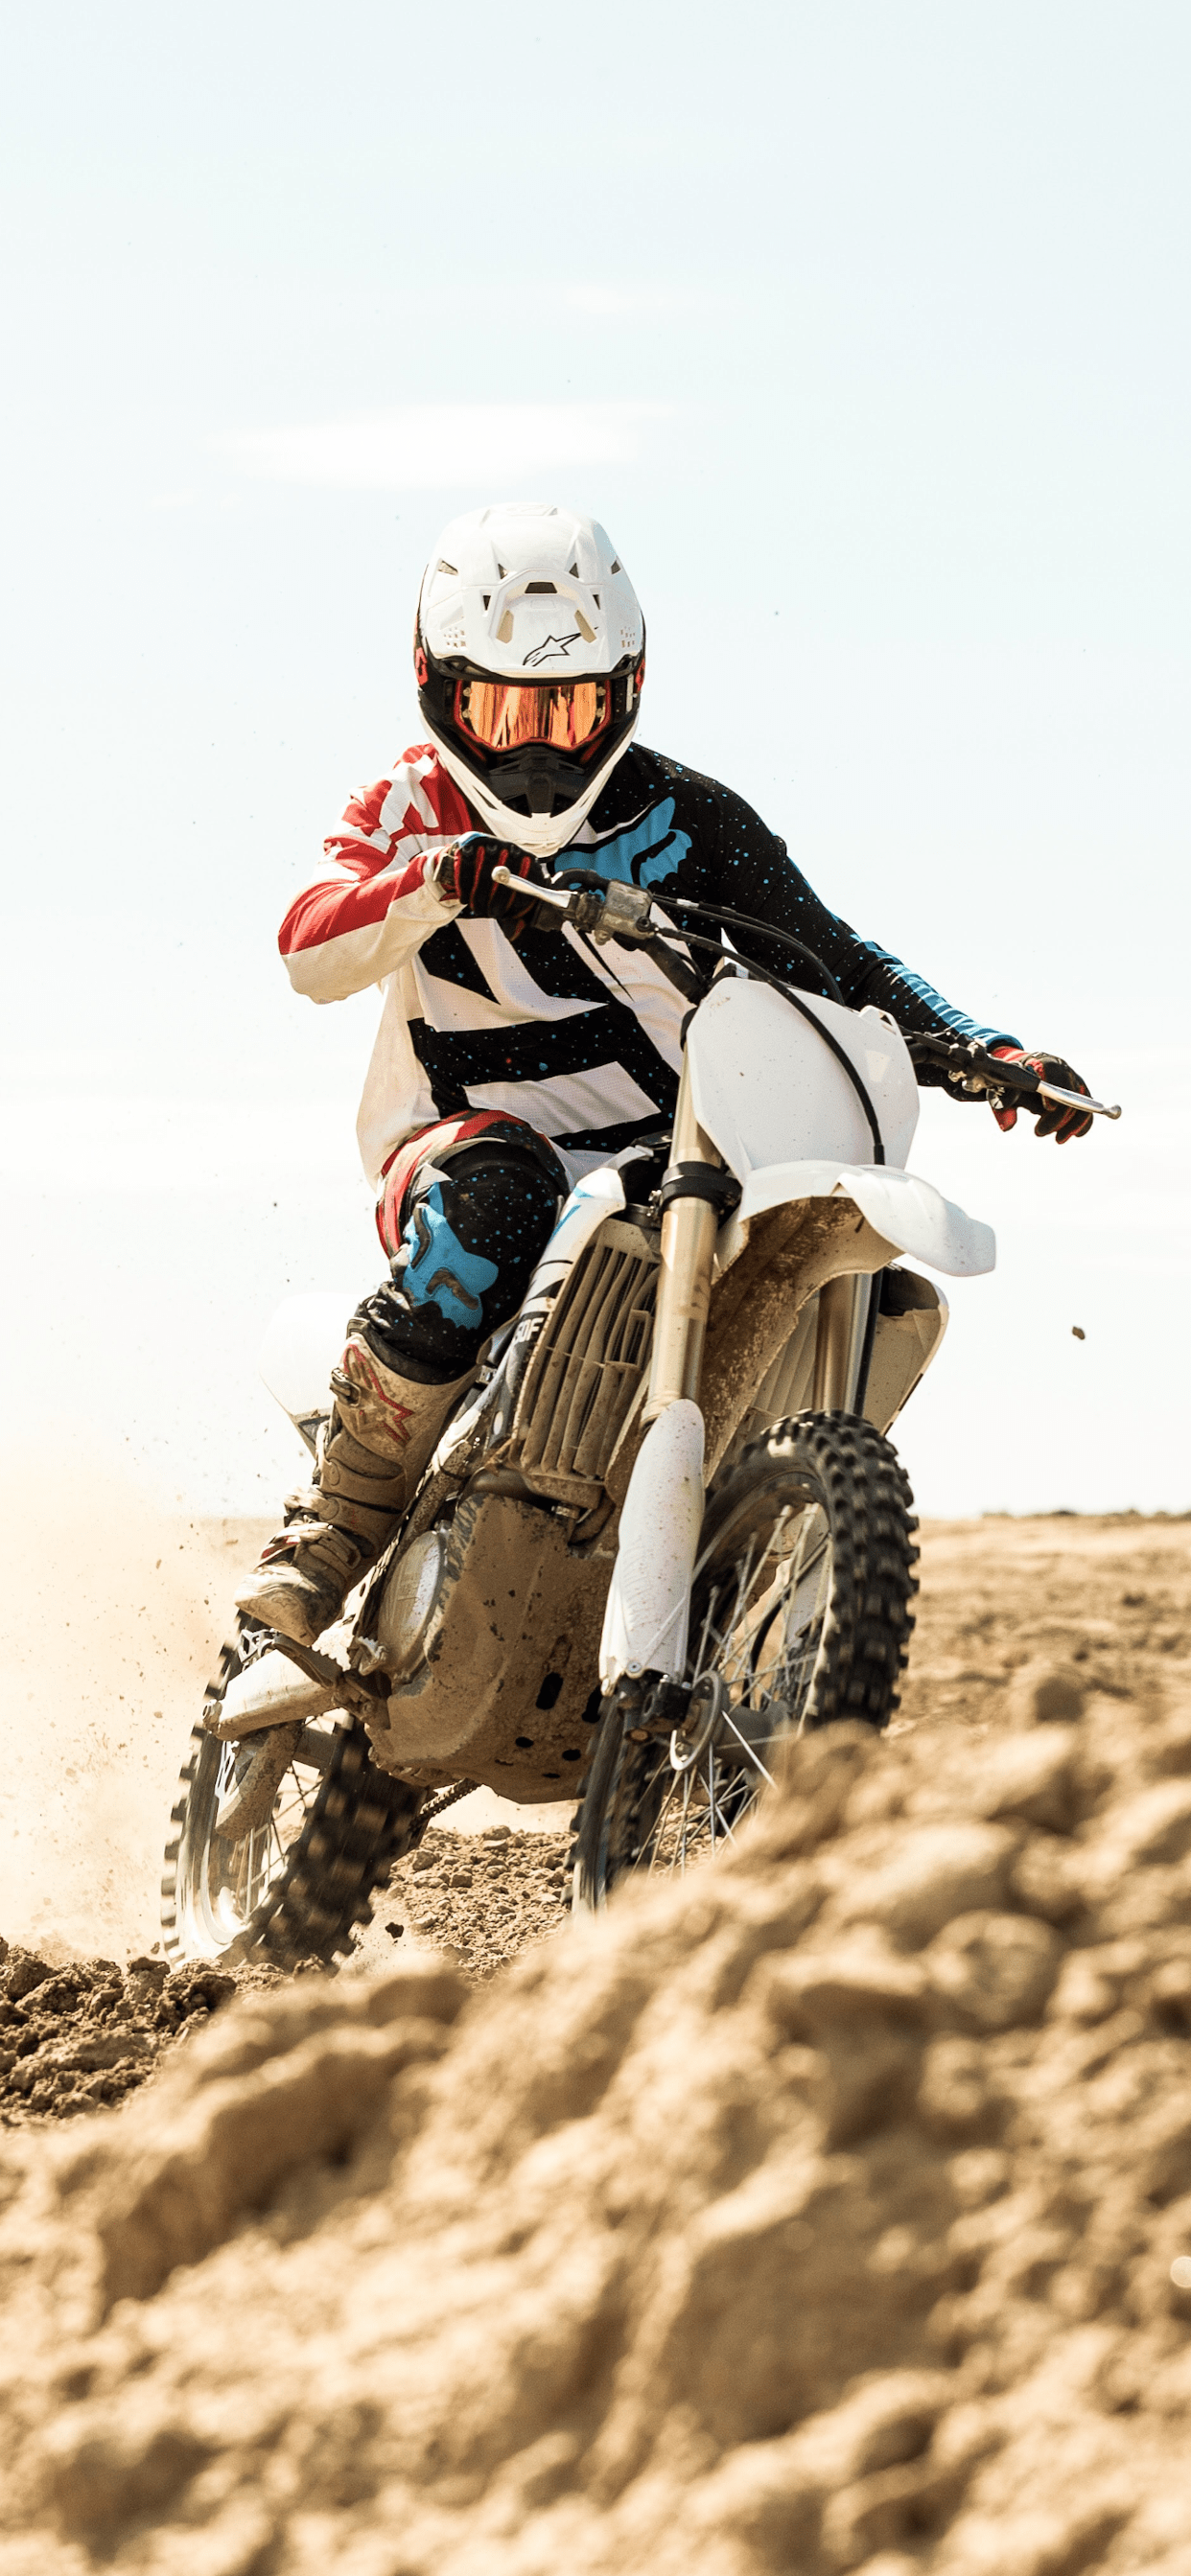 Motocross Wallpaper For iPhone Pro Max X